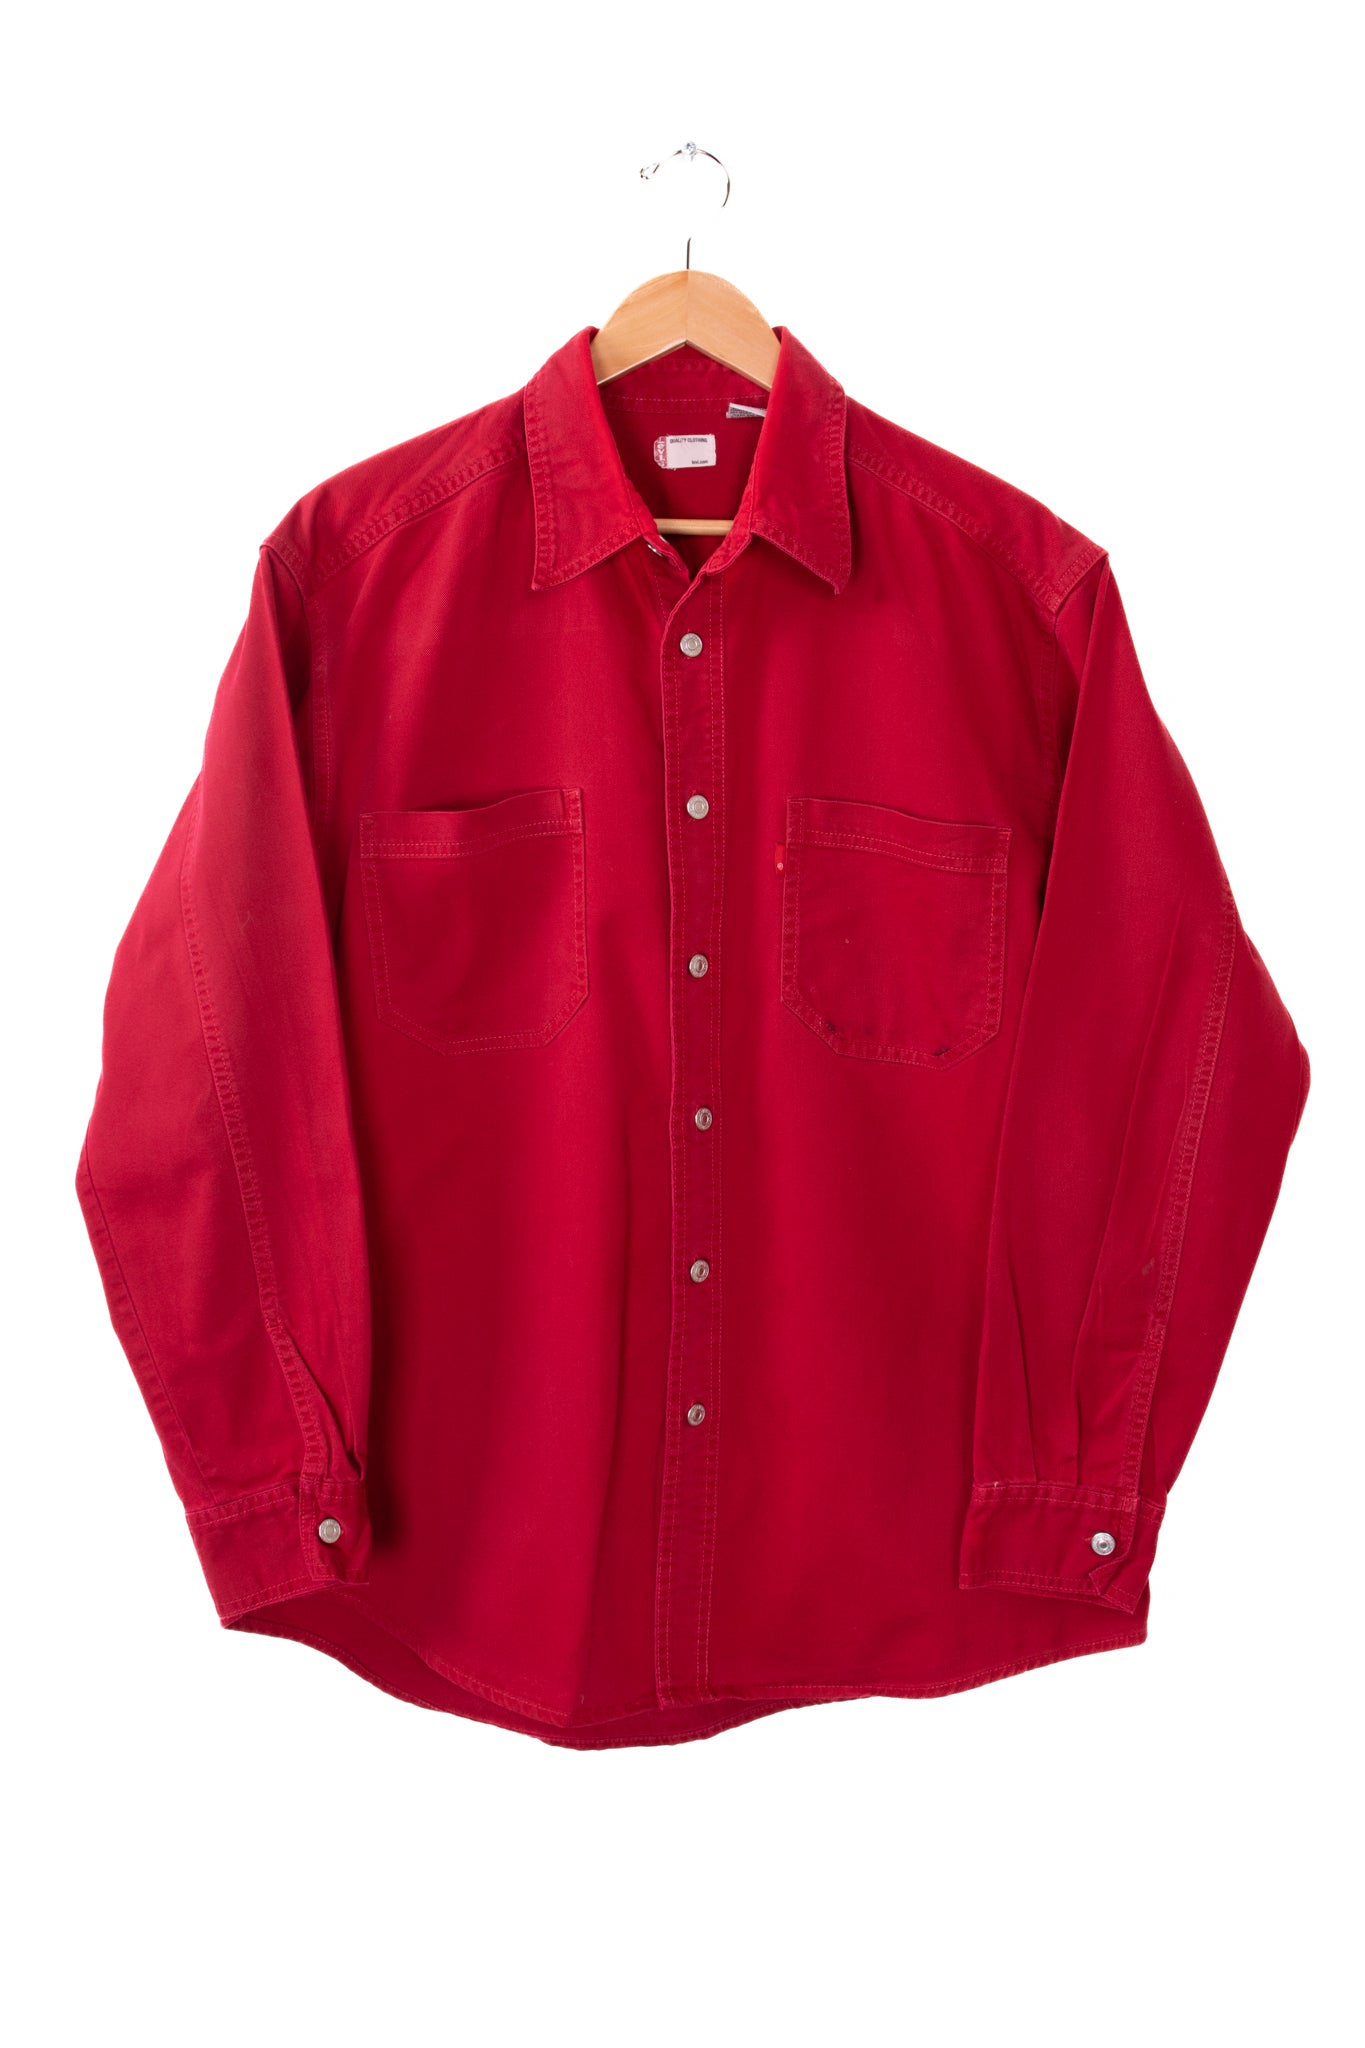 Levi's Red Denim Button Up